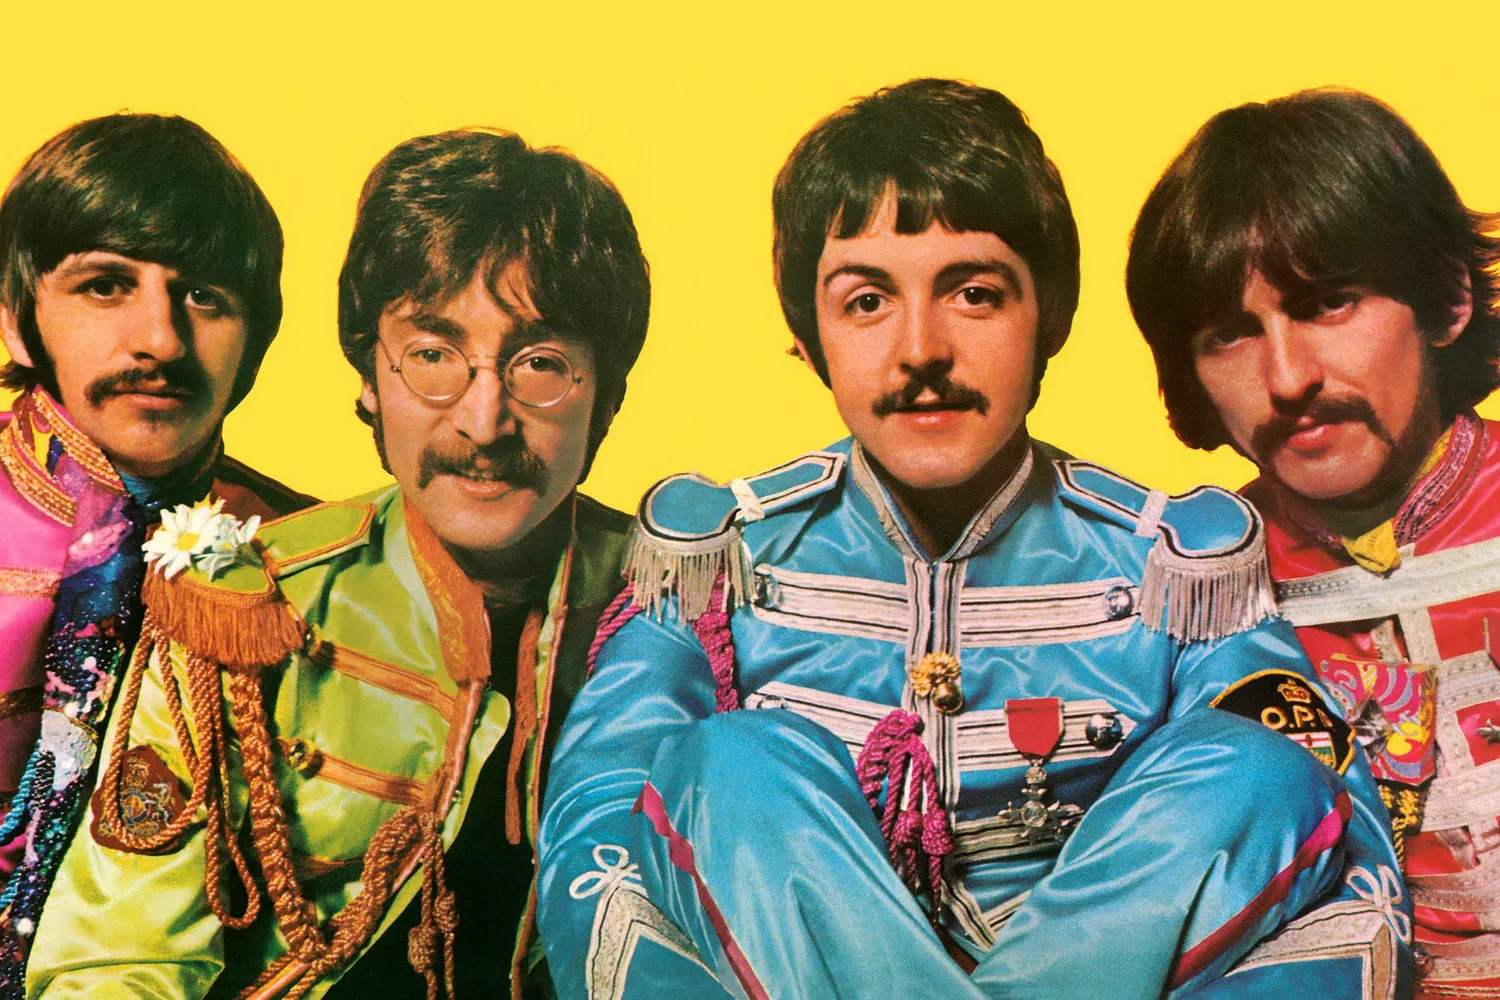 The Beatles during their "Sgt. Pepper" era, proudly displaying their 'moustachioed' looks